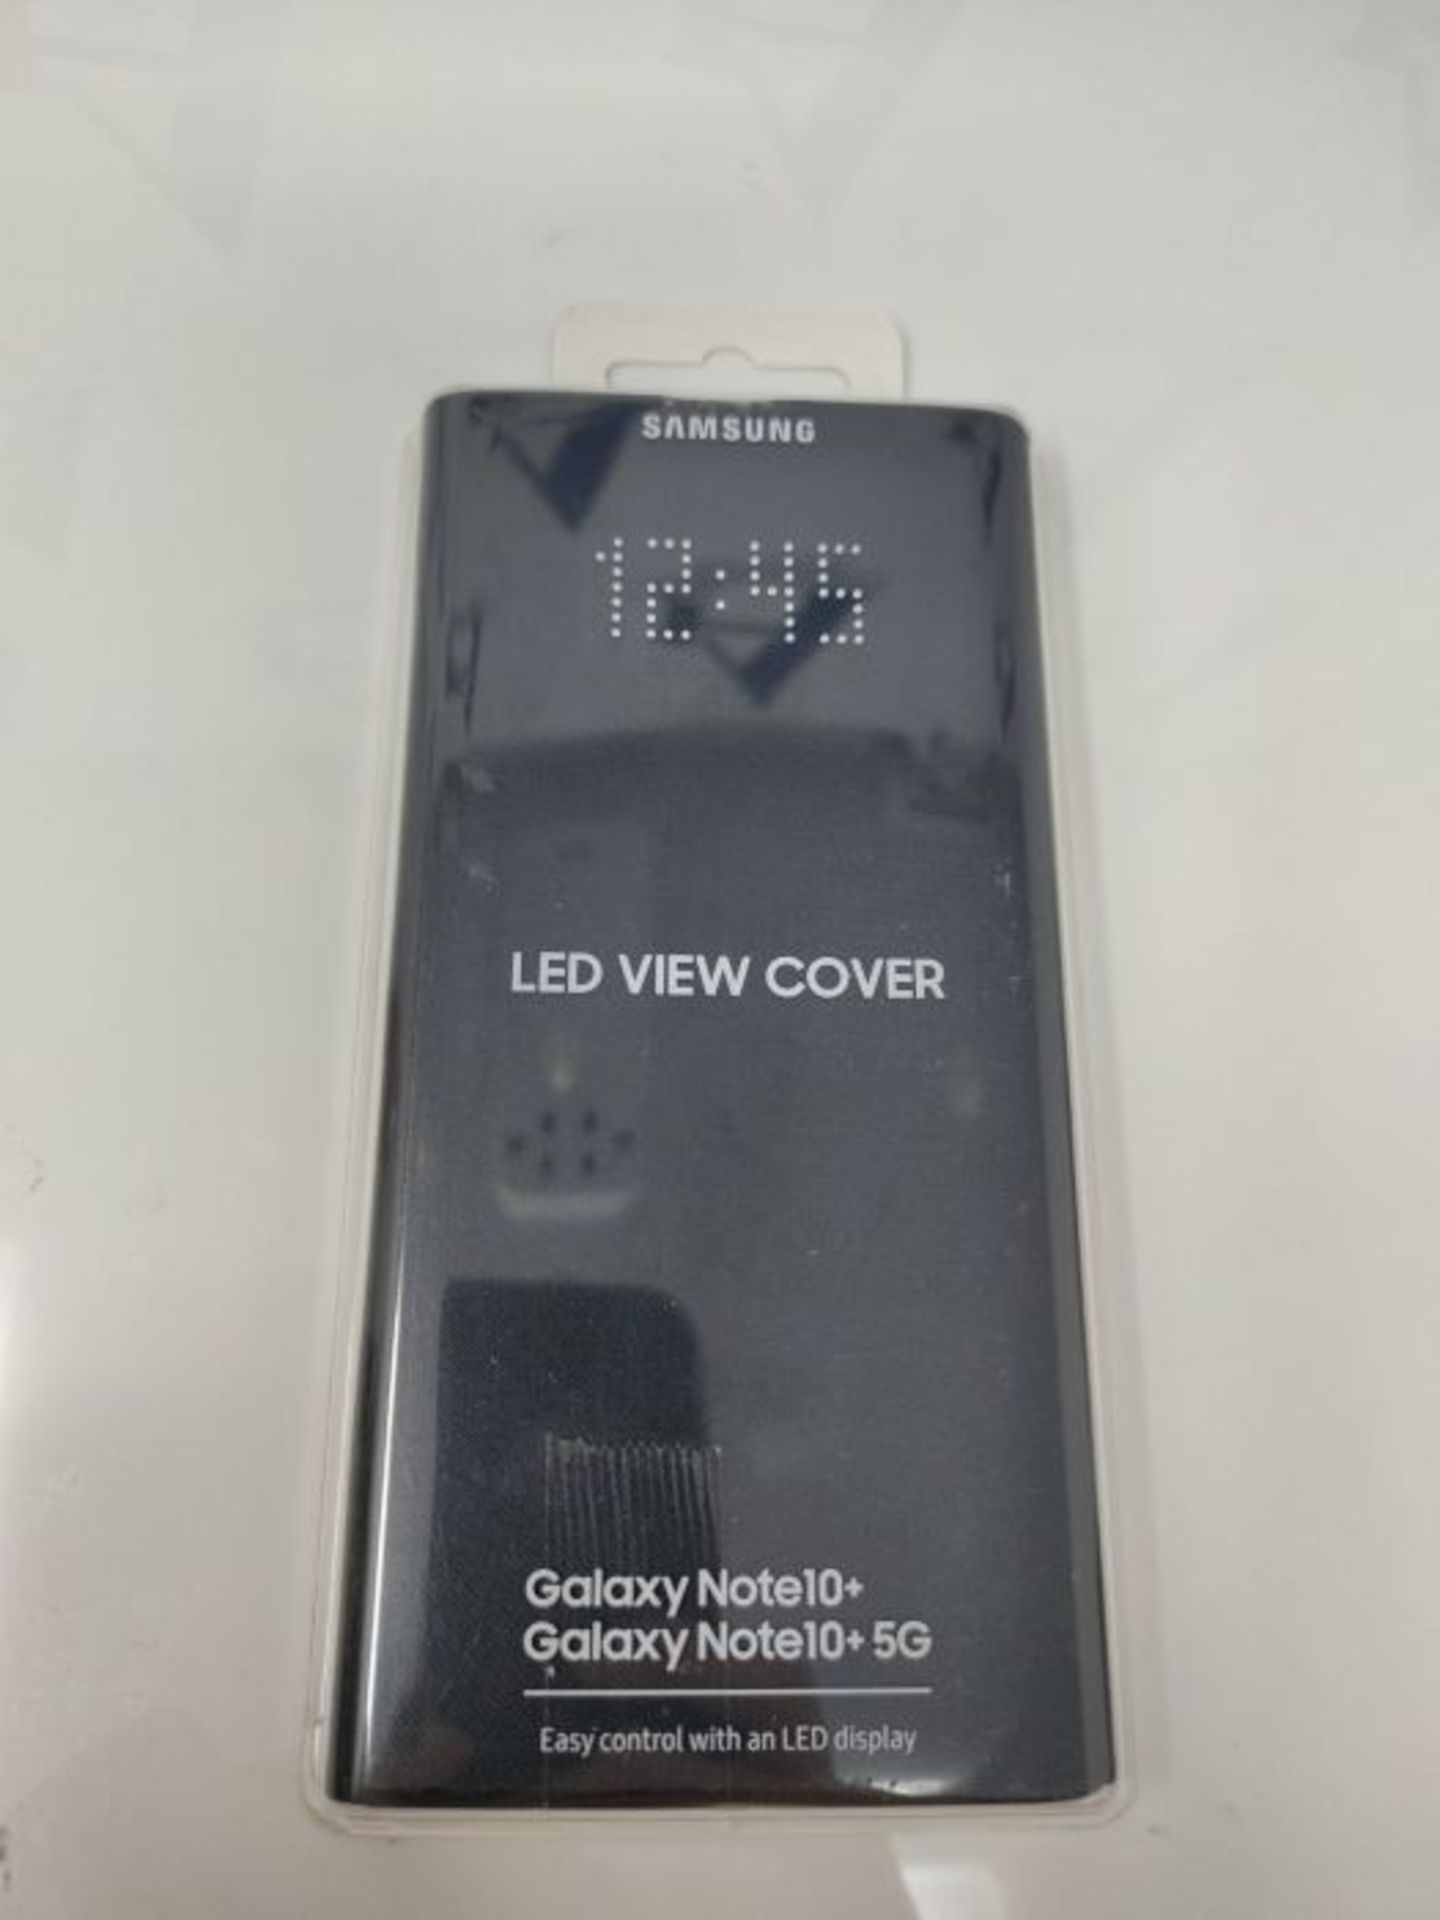 Samsung Original Galaxy Note 10+ LED View Cover Case - Black - Image 2 of 3